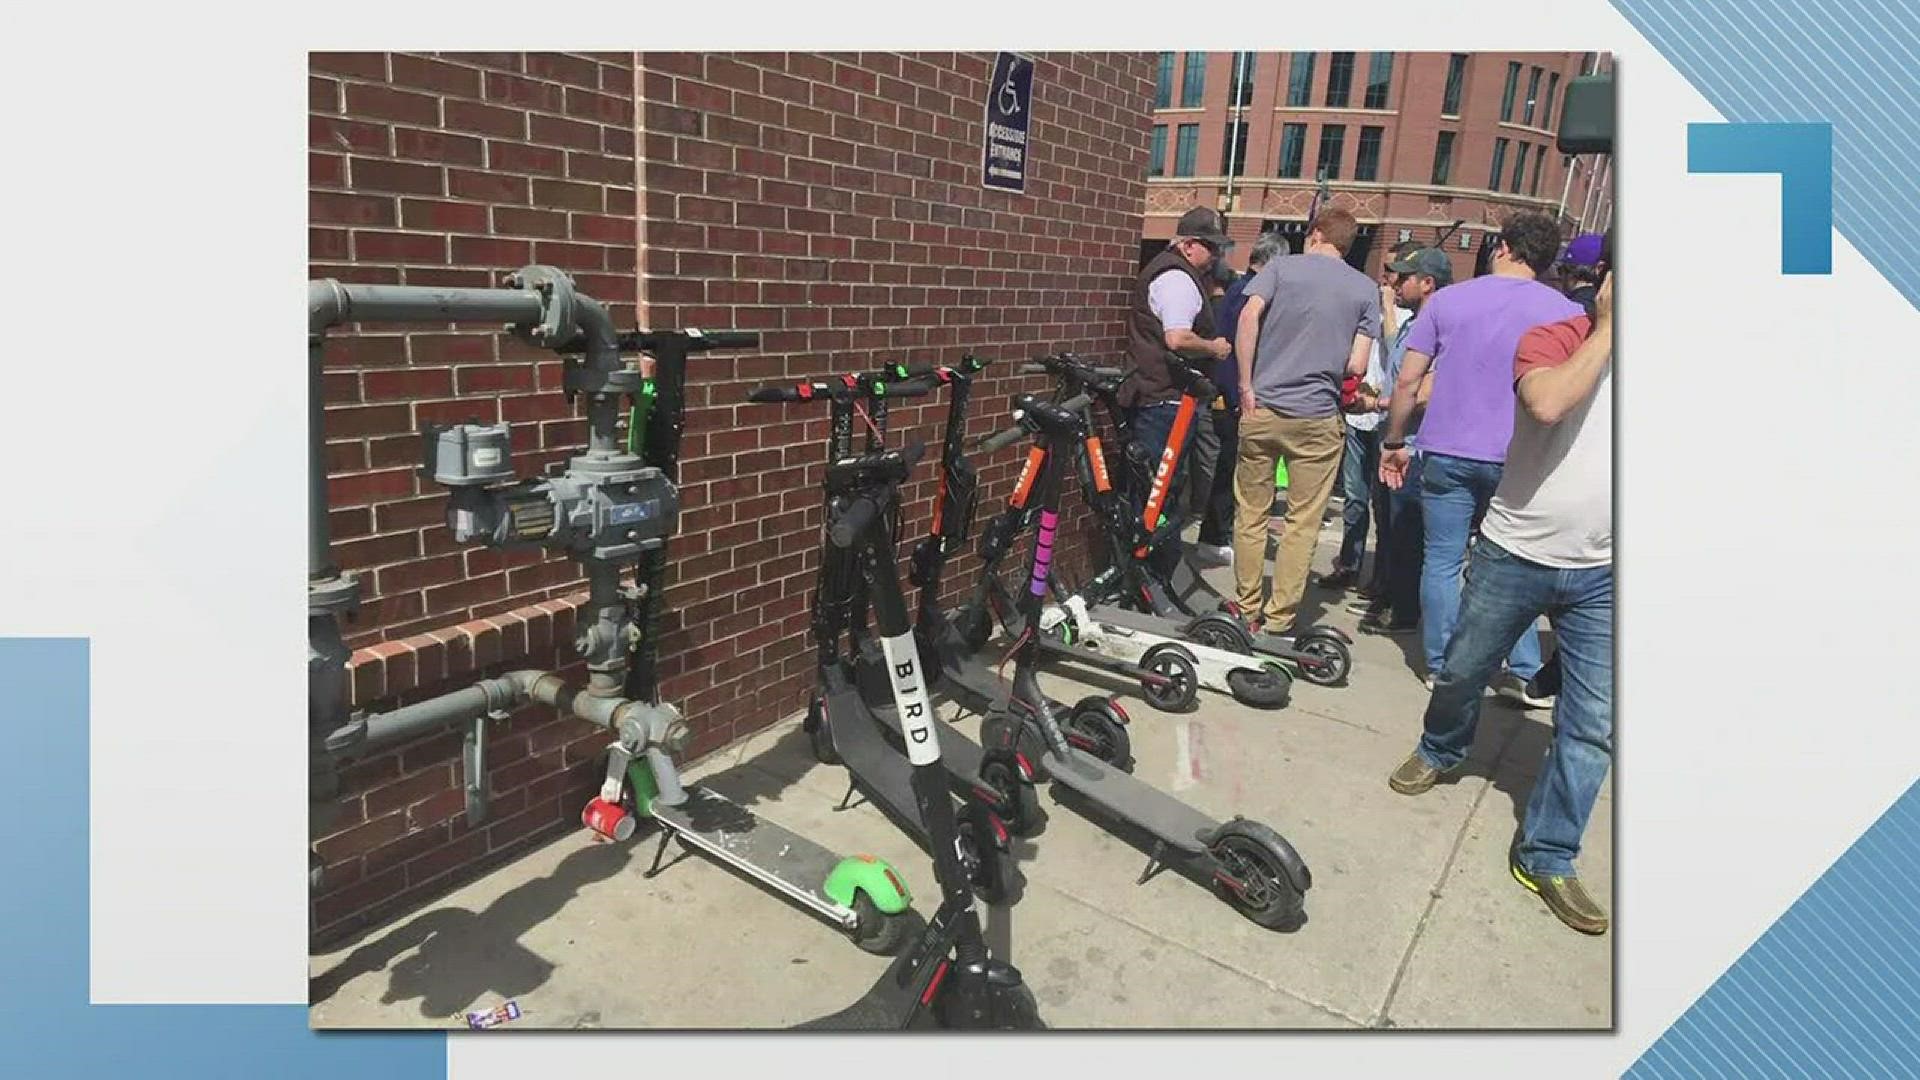 Since parking was upwards of $60 in lots near Coors Field, it makes sense that many fans chose not to drive to the game. Quite a few of them opted to take scooters instead.